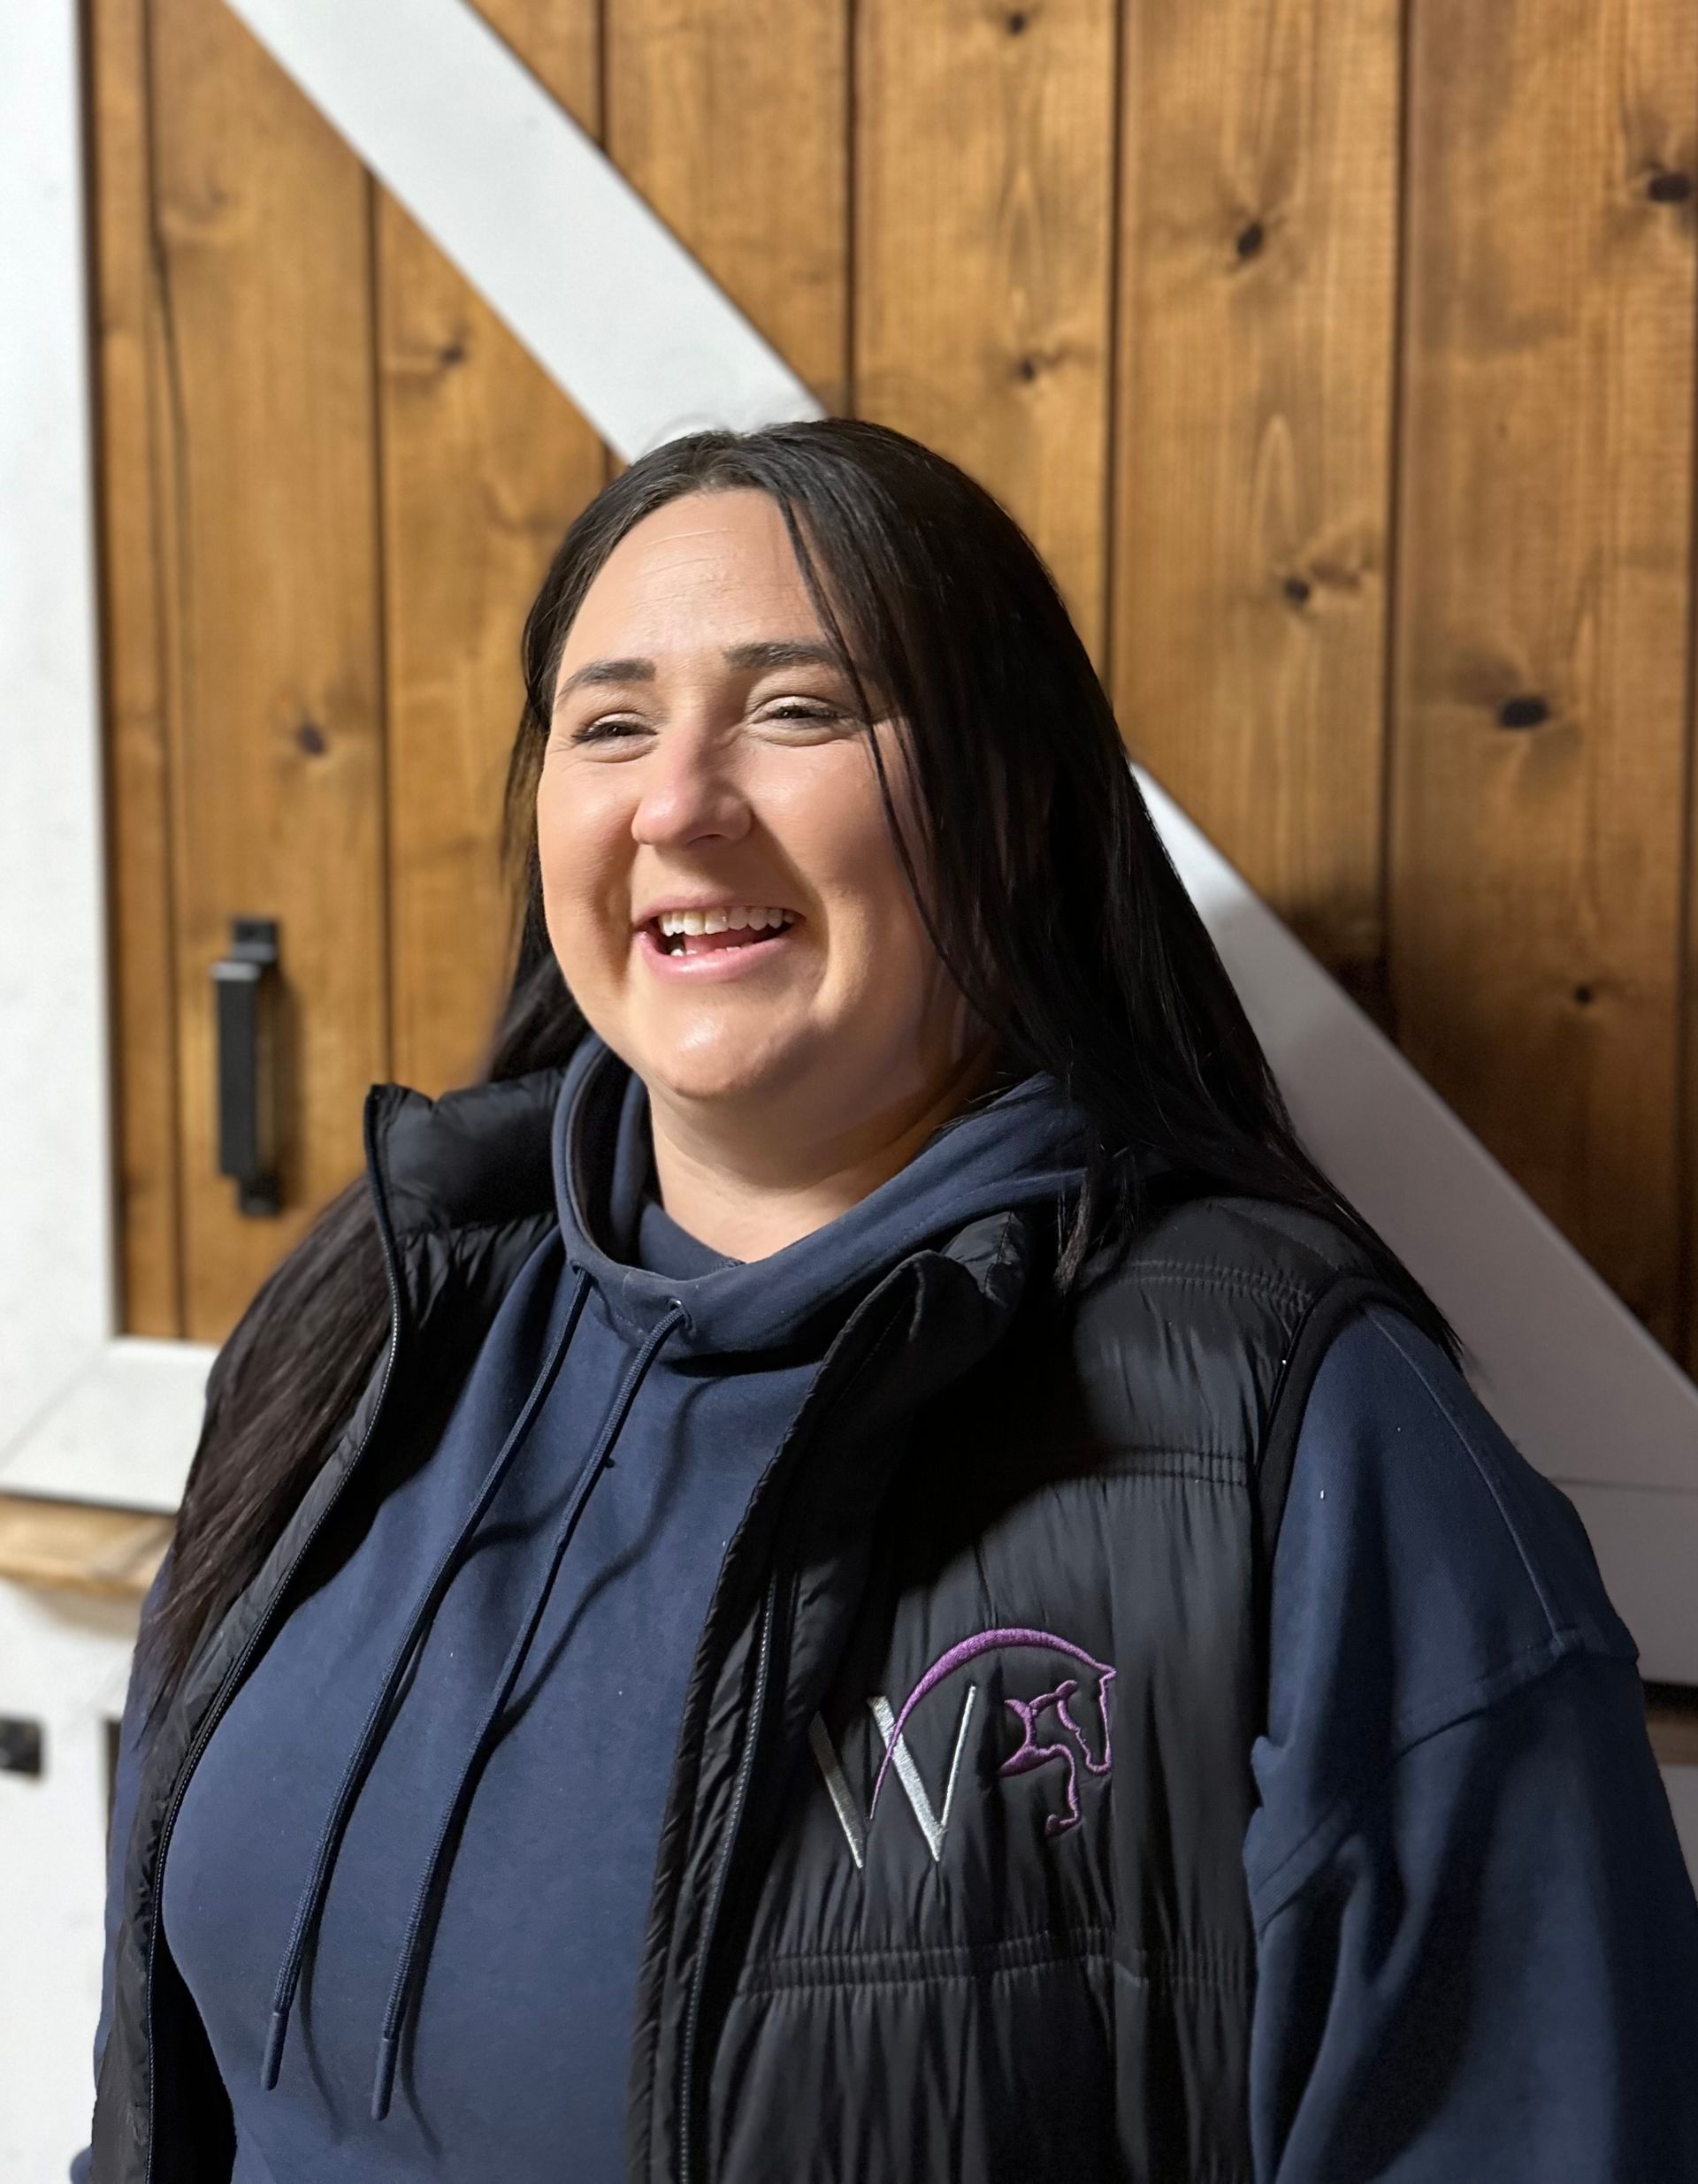 A woman wearing a black vest and a blue hoodie is smiling in front of a wooden wall.